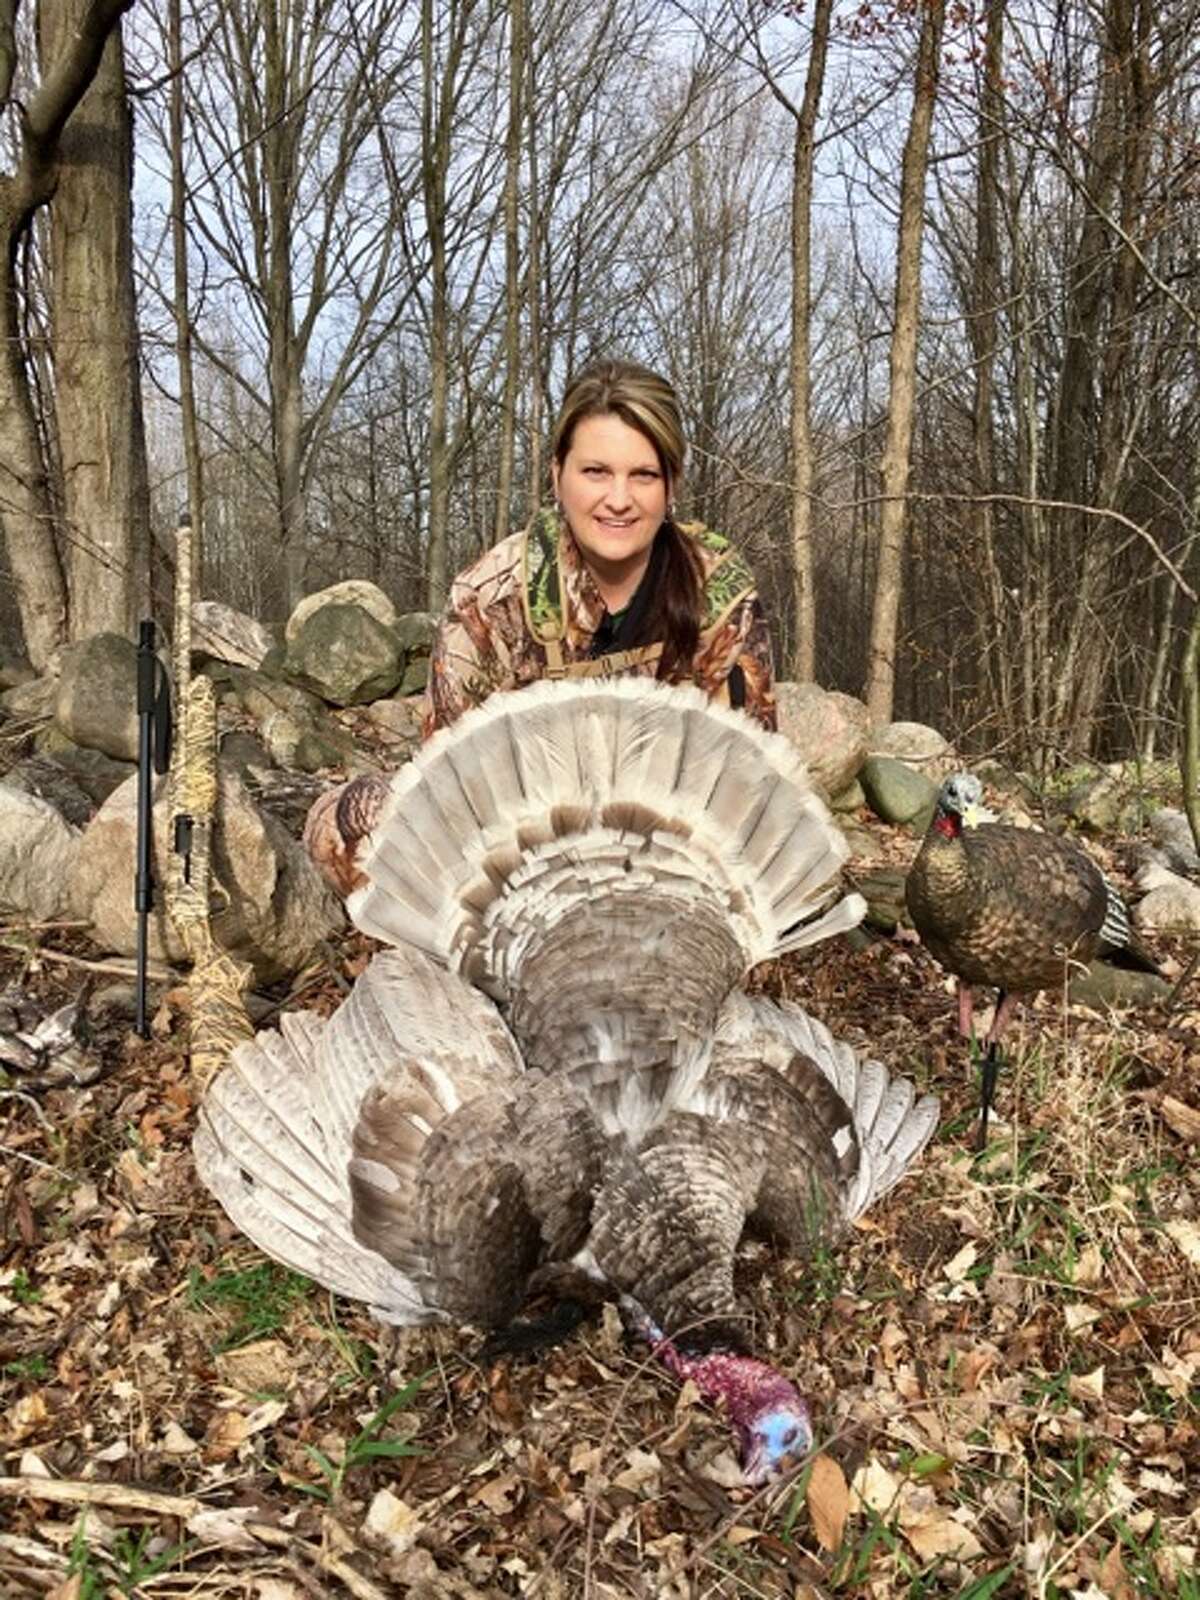 Tammy Livermore of Hersey shows off her unusual smoky-gray colored turkey.